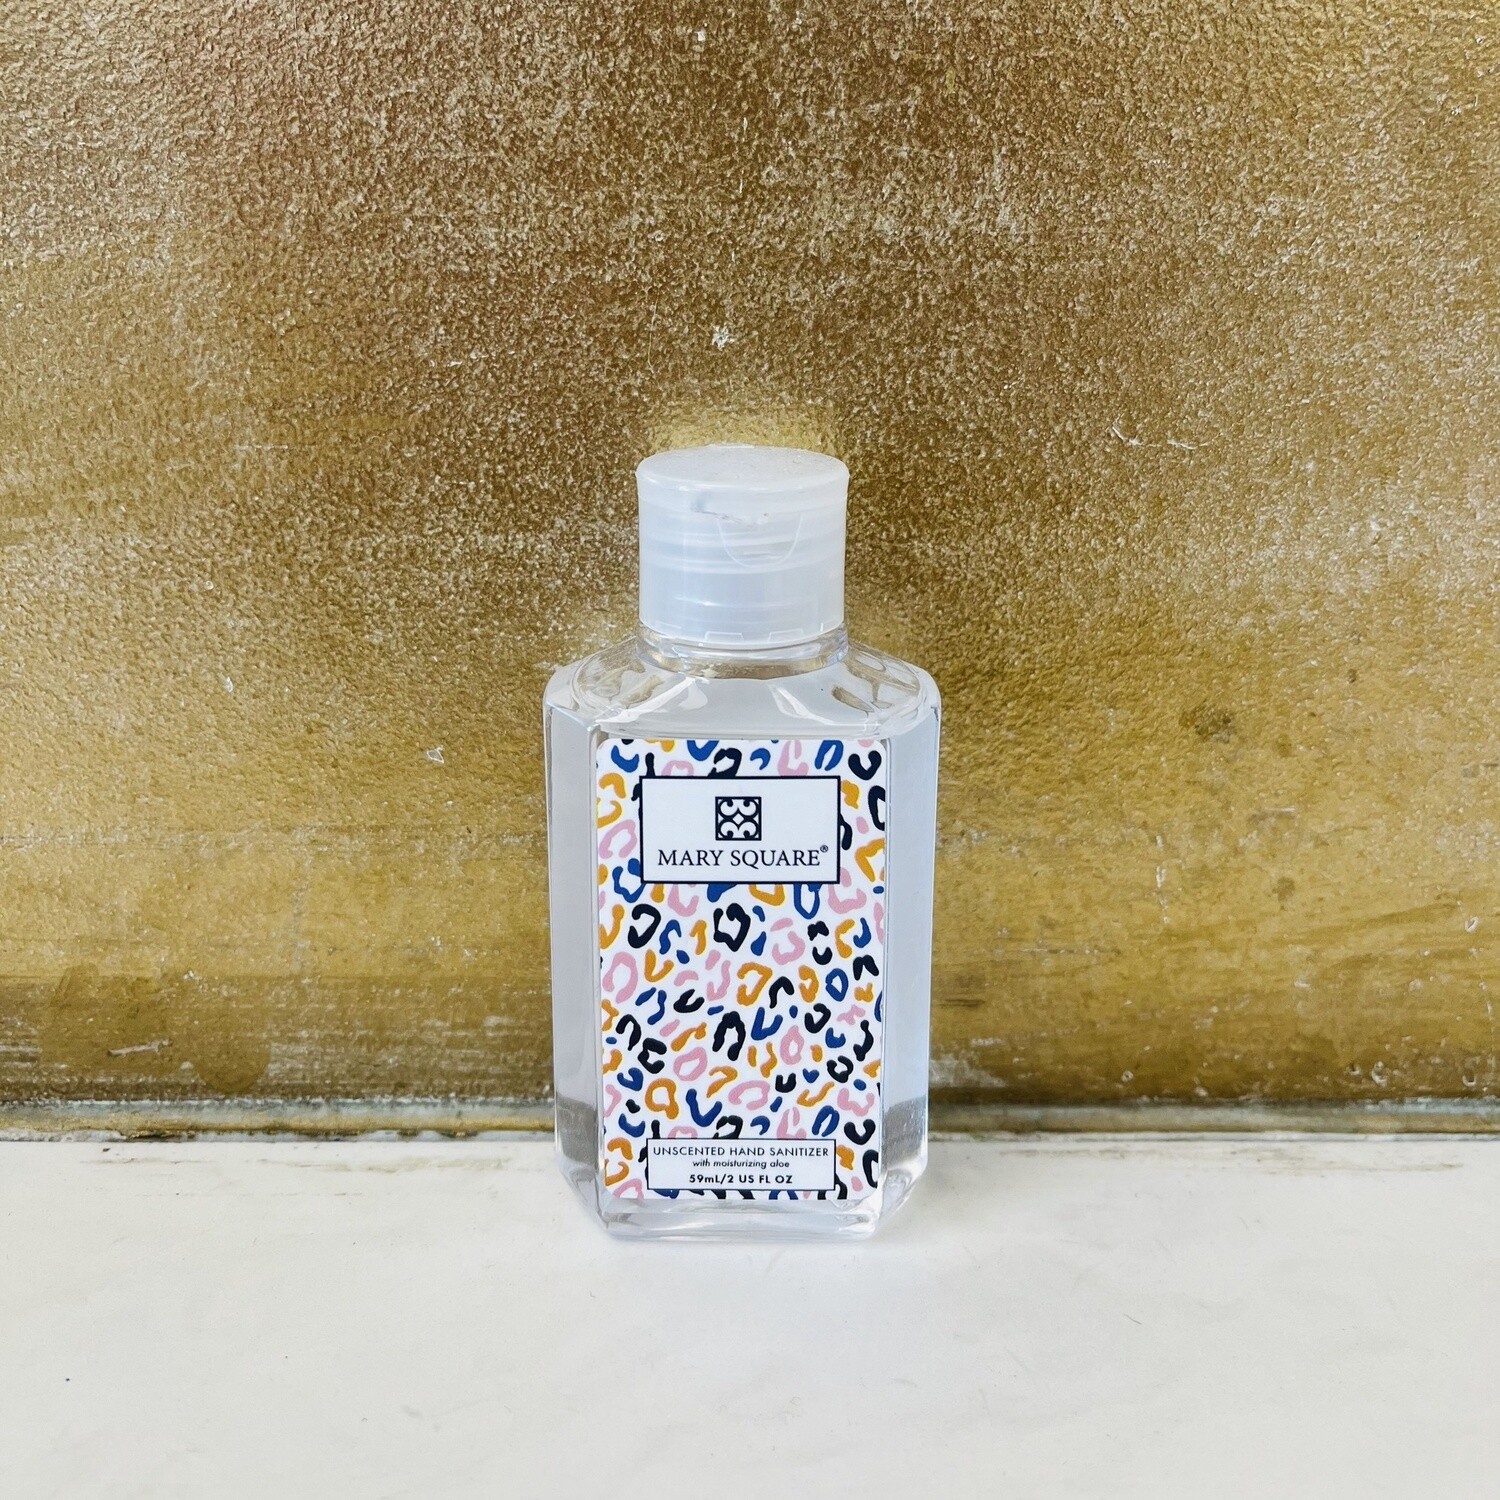 Mary Square Unscented Hand Sanitizer